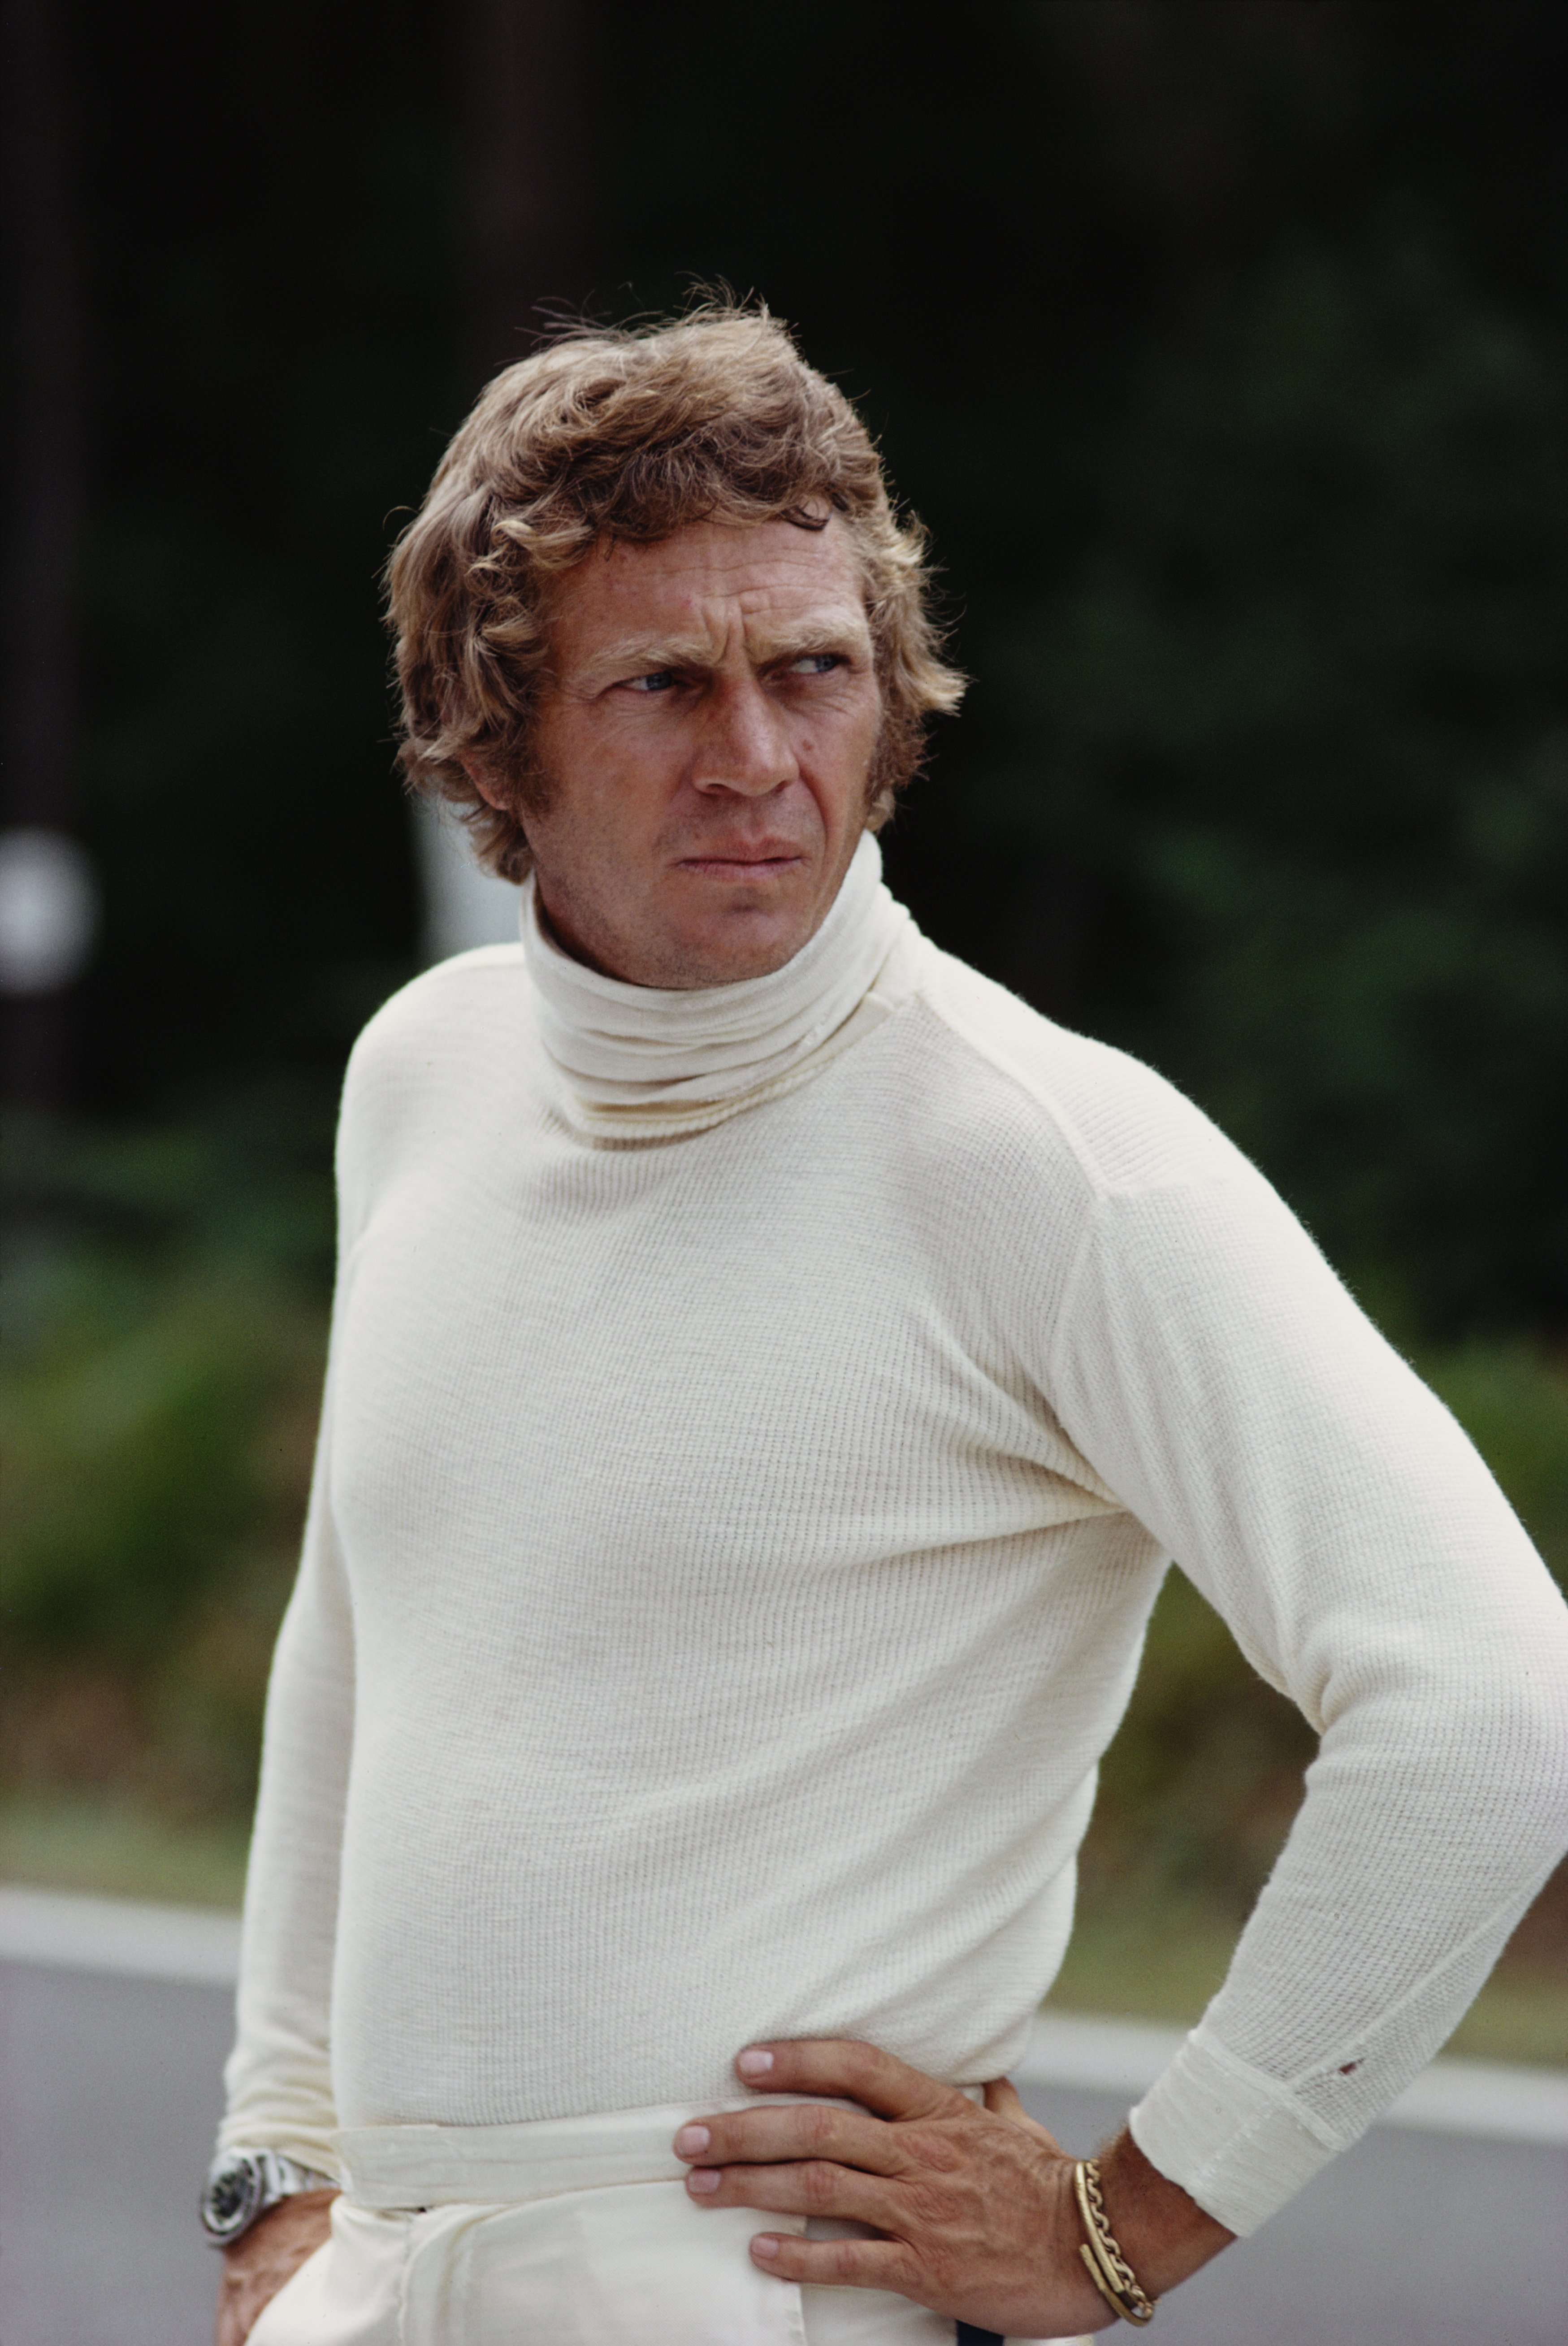 Steve McQueen pictured during the making of the feature film "Le Mans" in 1971. | Source: Getty Images